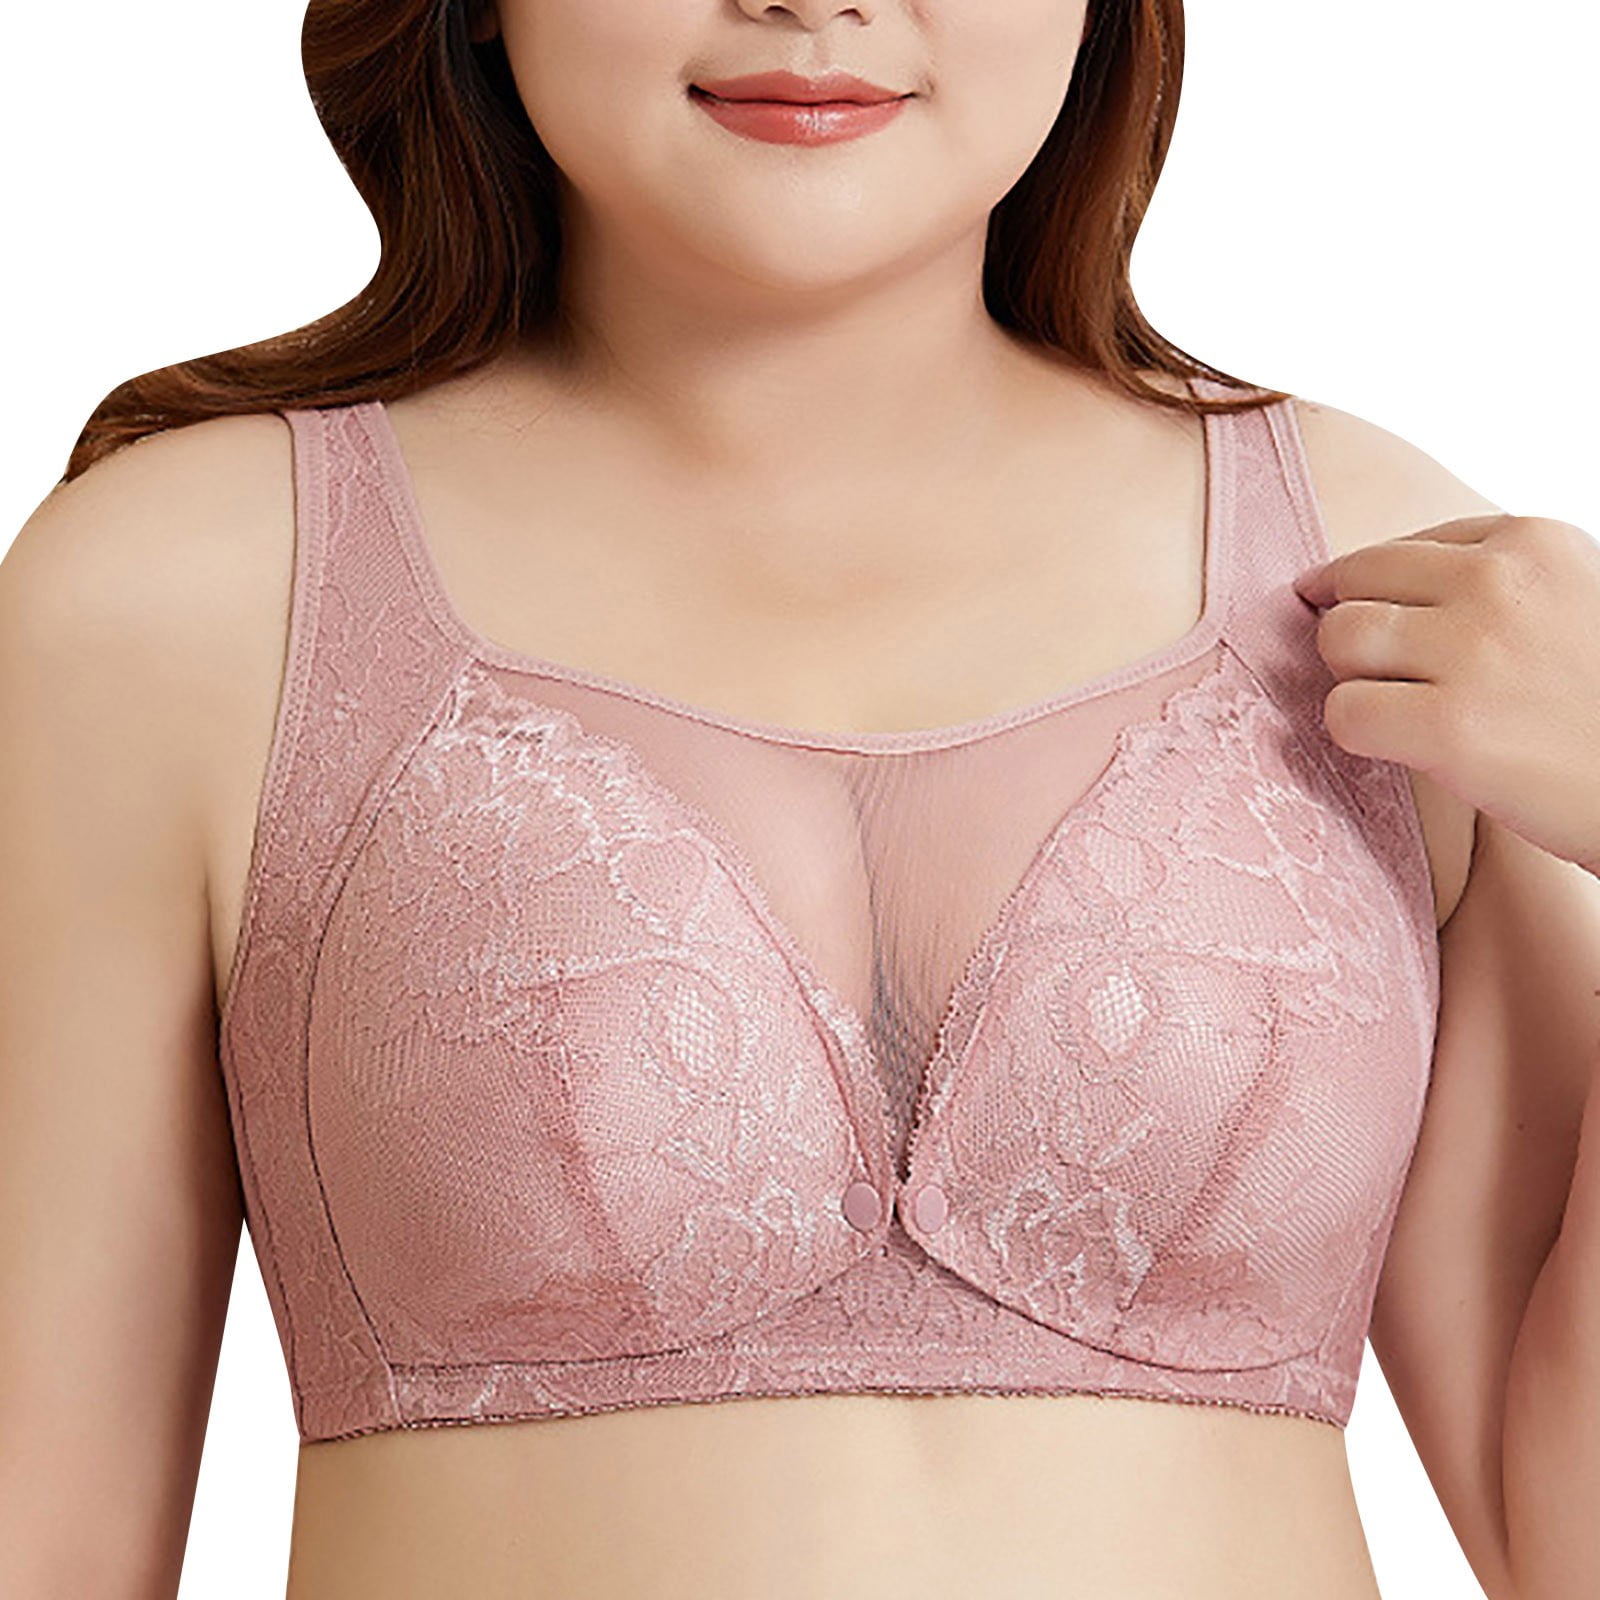 Big Breasted Lace Bra High Quality Daily Used Lace 34 Bra Size Women Bra -  China Nursing Bra Tali Silang and Leak Proof Nursing Bras price